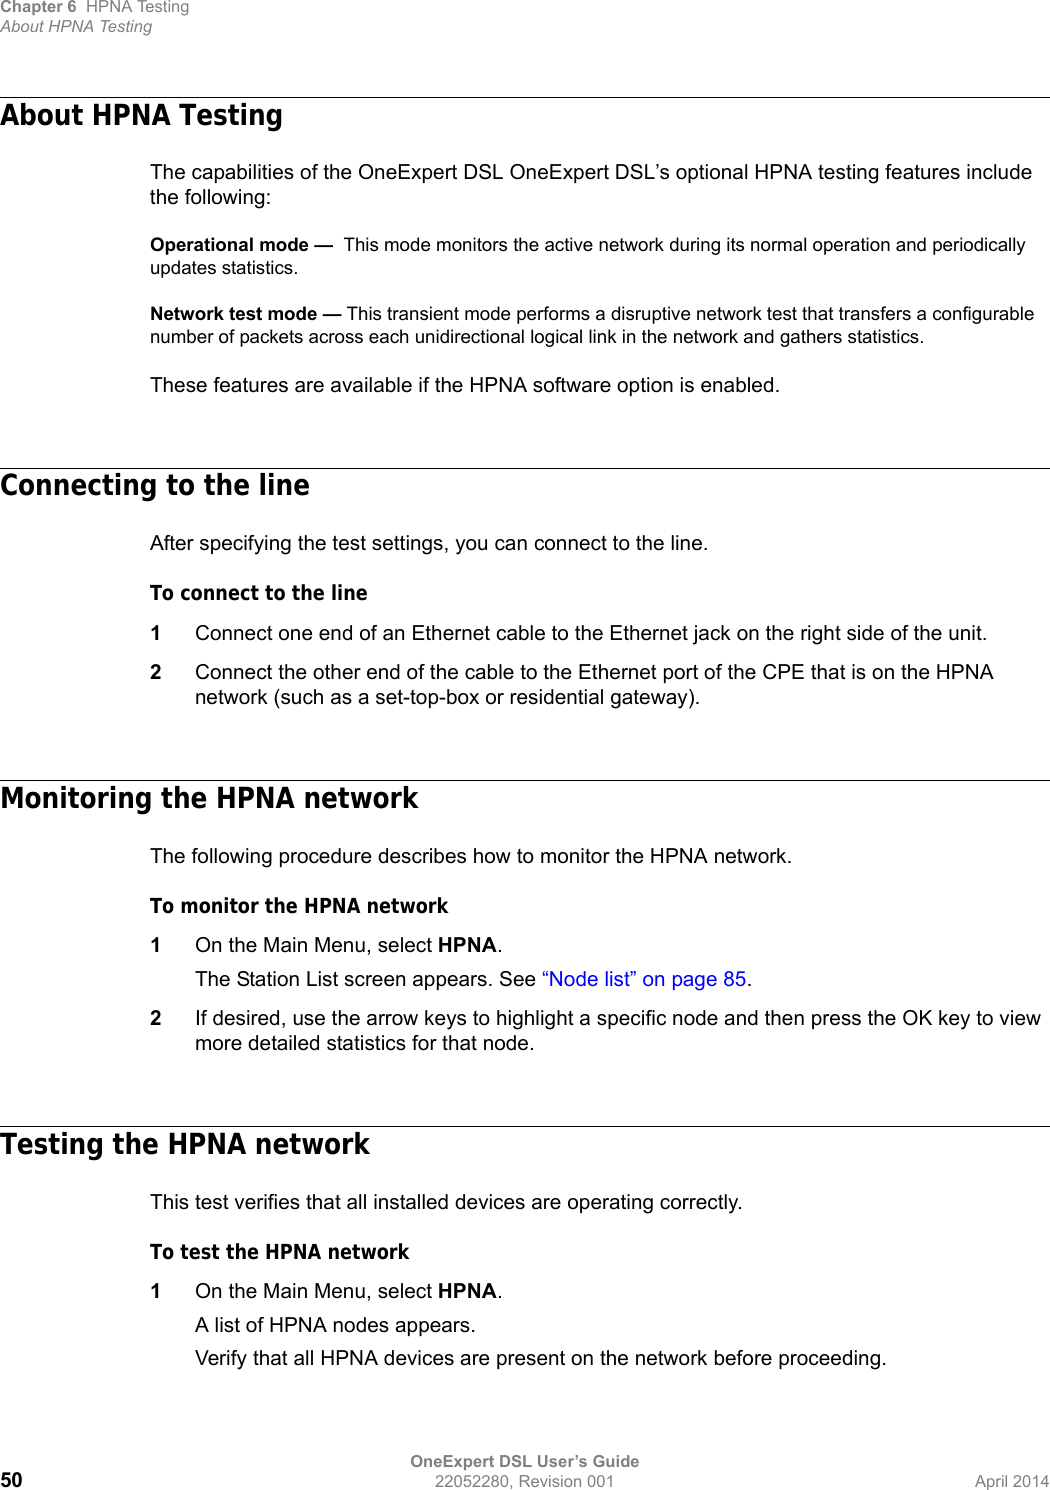 Chapter 6 HPNA TestingAbout HPNA TestingOneExpert DSL User’s Guide50 22052280, Revision 001 April 2014About HPNA TestingThe capabilities of the OneExpert DSL OneExpert DSL’s optional HPNA testing features include the following:Operational mode —  This mode monitors the active network during its normal operation and periodically updates statistics.Network test mode — This transient mode performs a disruptive network test that transfers a configurable number of packets across each unidirectional logical link in the network and gathers statistics.These features are available if the HPNA software option is enabled.Connecting to the lineAfter specifying the test settings, you can connect to the line.To connect to the line1Connect one end of an Ethernet cable to the Ethernet jack on the right side of the unit.2Connect the other end of the cable to the Ethernet port of the CPE that is on the HPNA network (such as a set-top-box or residential gateway).Monitoring the HPNA networkThe following procedure describes how to monitor the HPNA network.To monitor the HPNA network1On the Main Menu, select HPNA.The Station List screen appears. See “Node list” on page 85.2If desired, use the arrow keys to highlight a specific node and then press the OK key to view more detailed statistics for that node.Testing the HPNA networkThis test verifies that all installed devices are operating correctly.To test the HPNA network1On the Main Menu, select HPNA.A list of HPNA nodes appears.Verify that all HPNA devices are present on the network before proceeding.